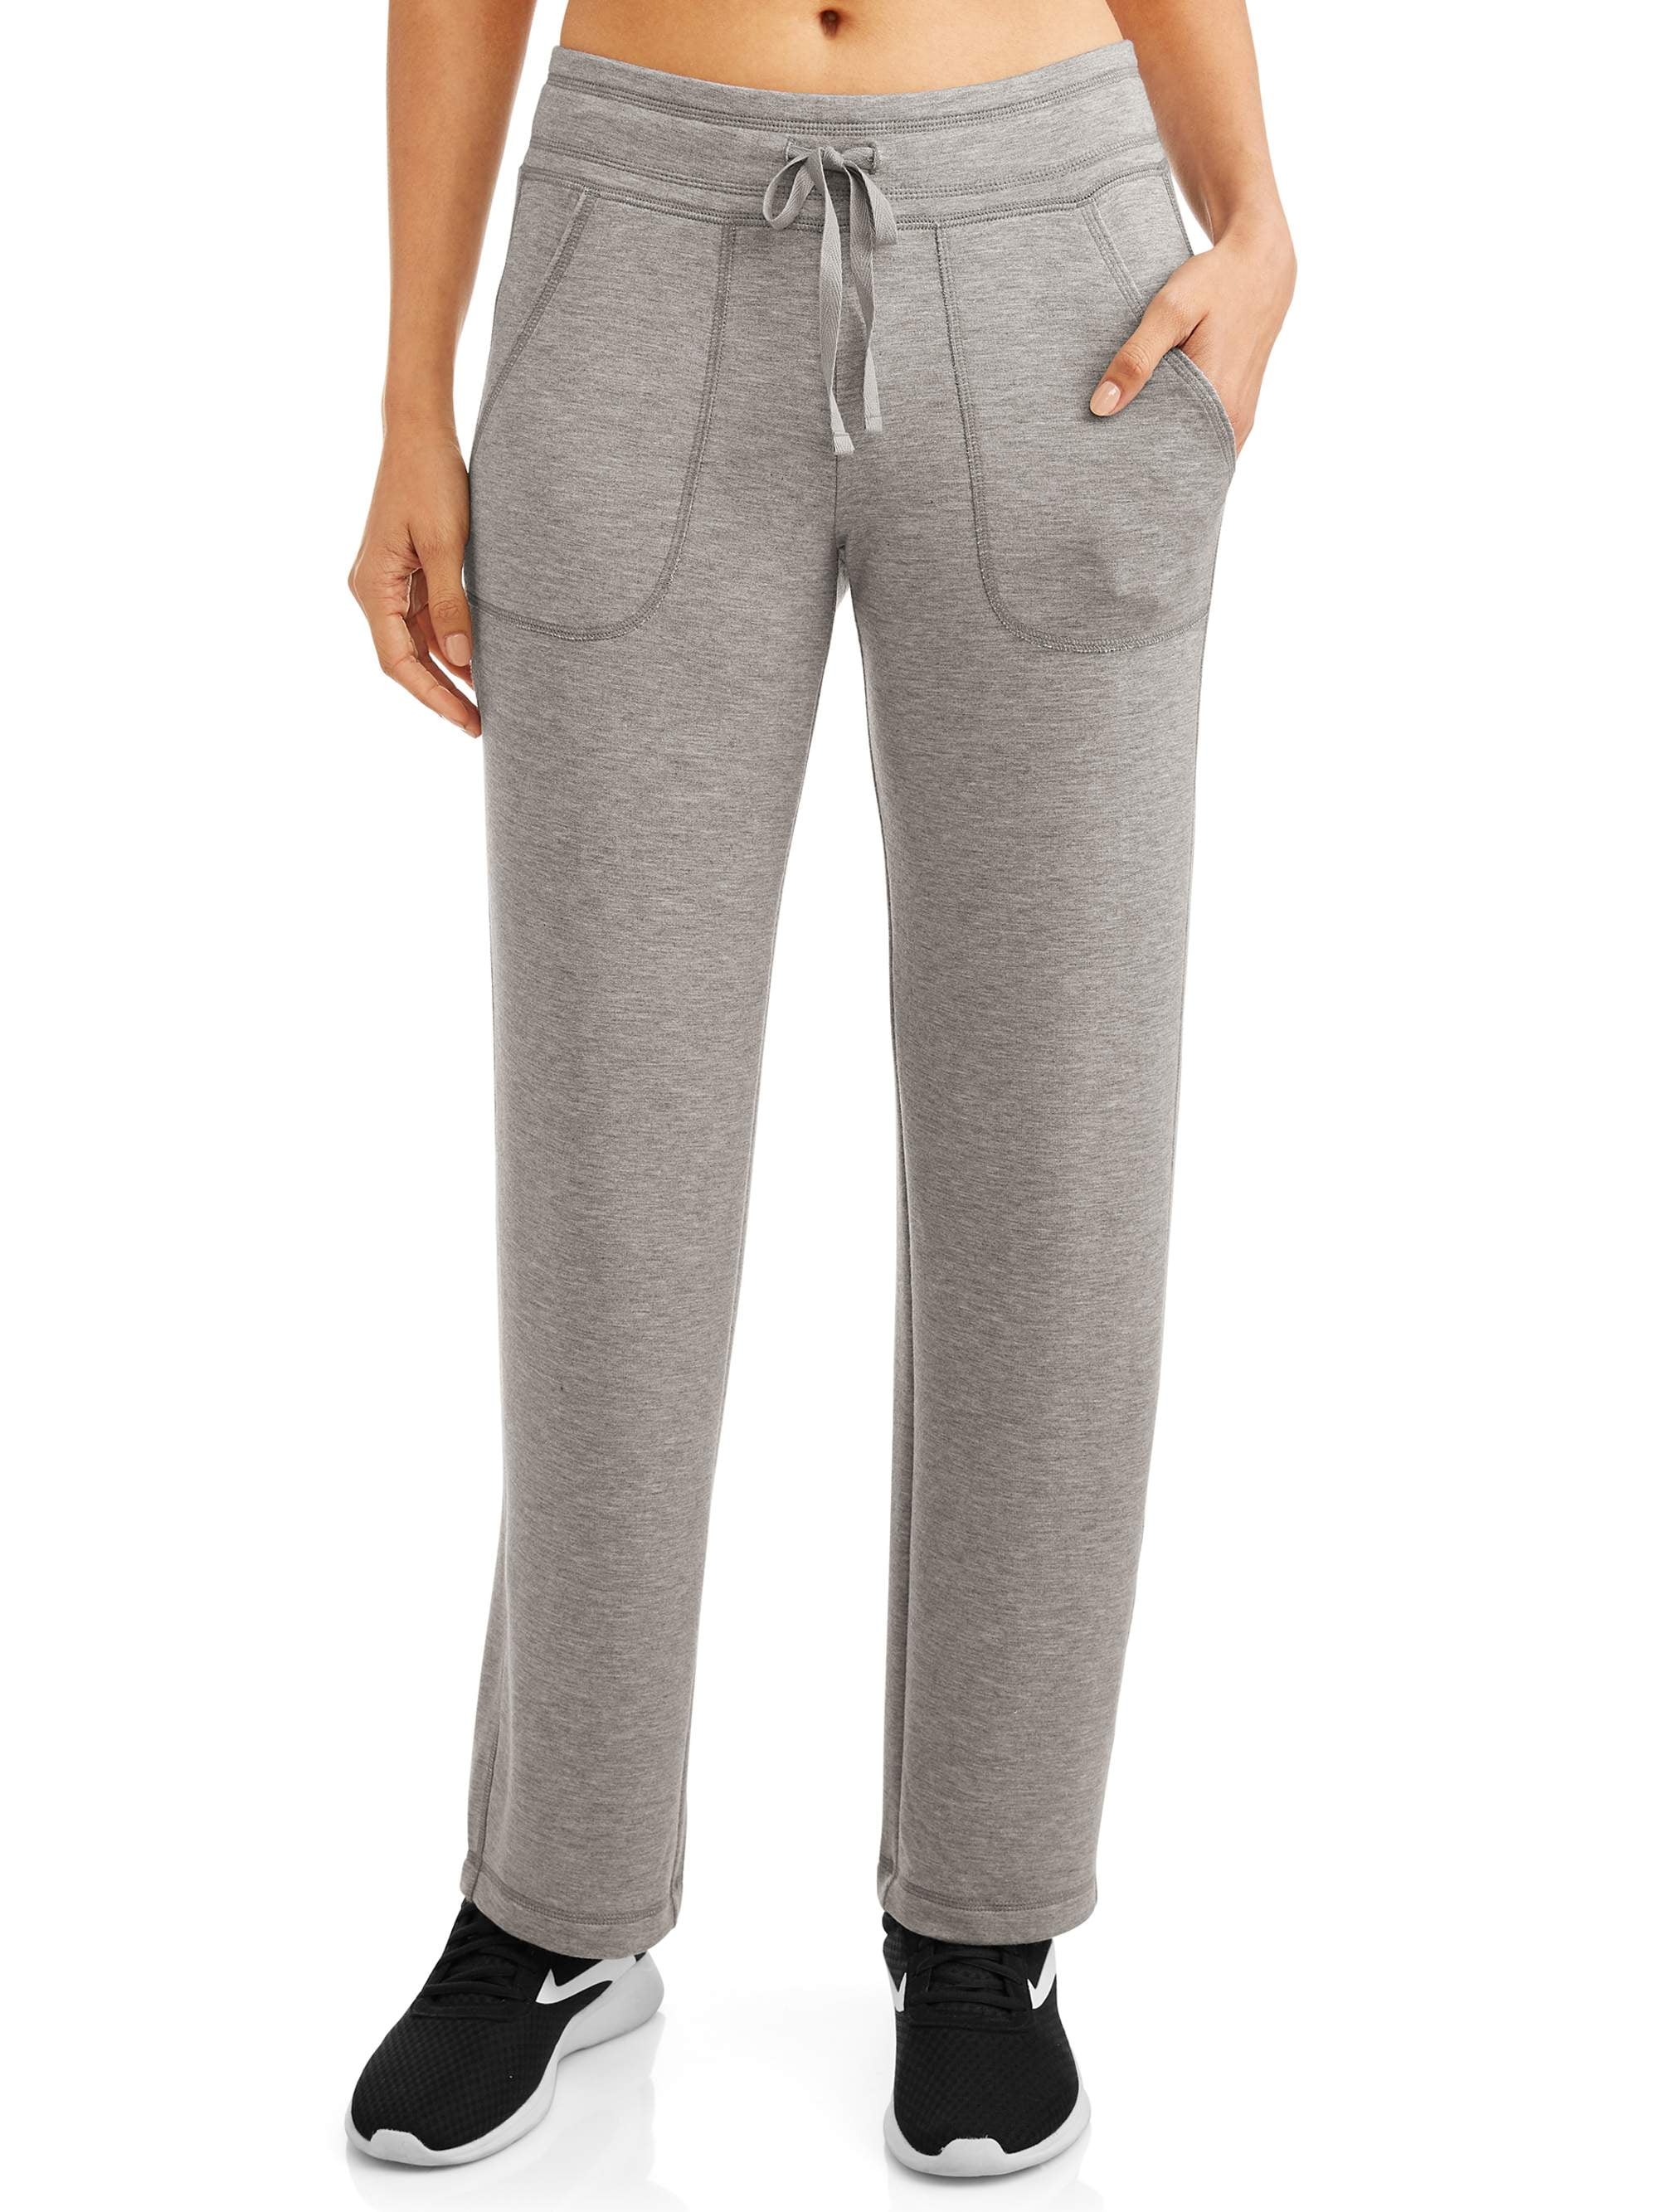 Athletic Works Women's Athleisure Relaxed Pants - Walmart.com